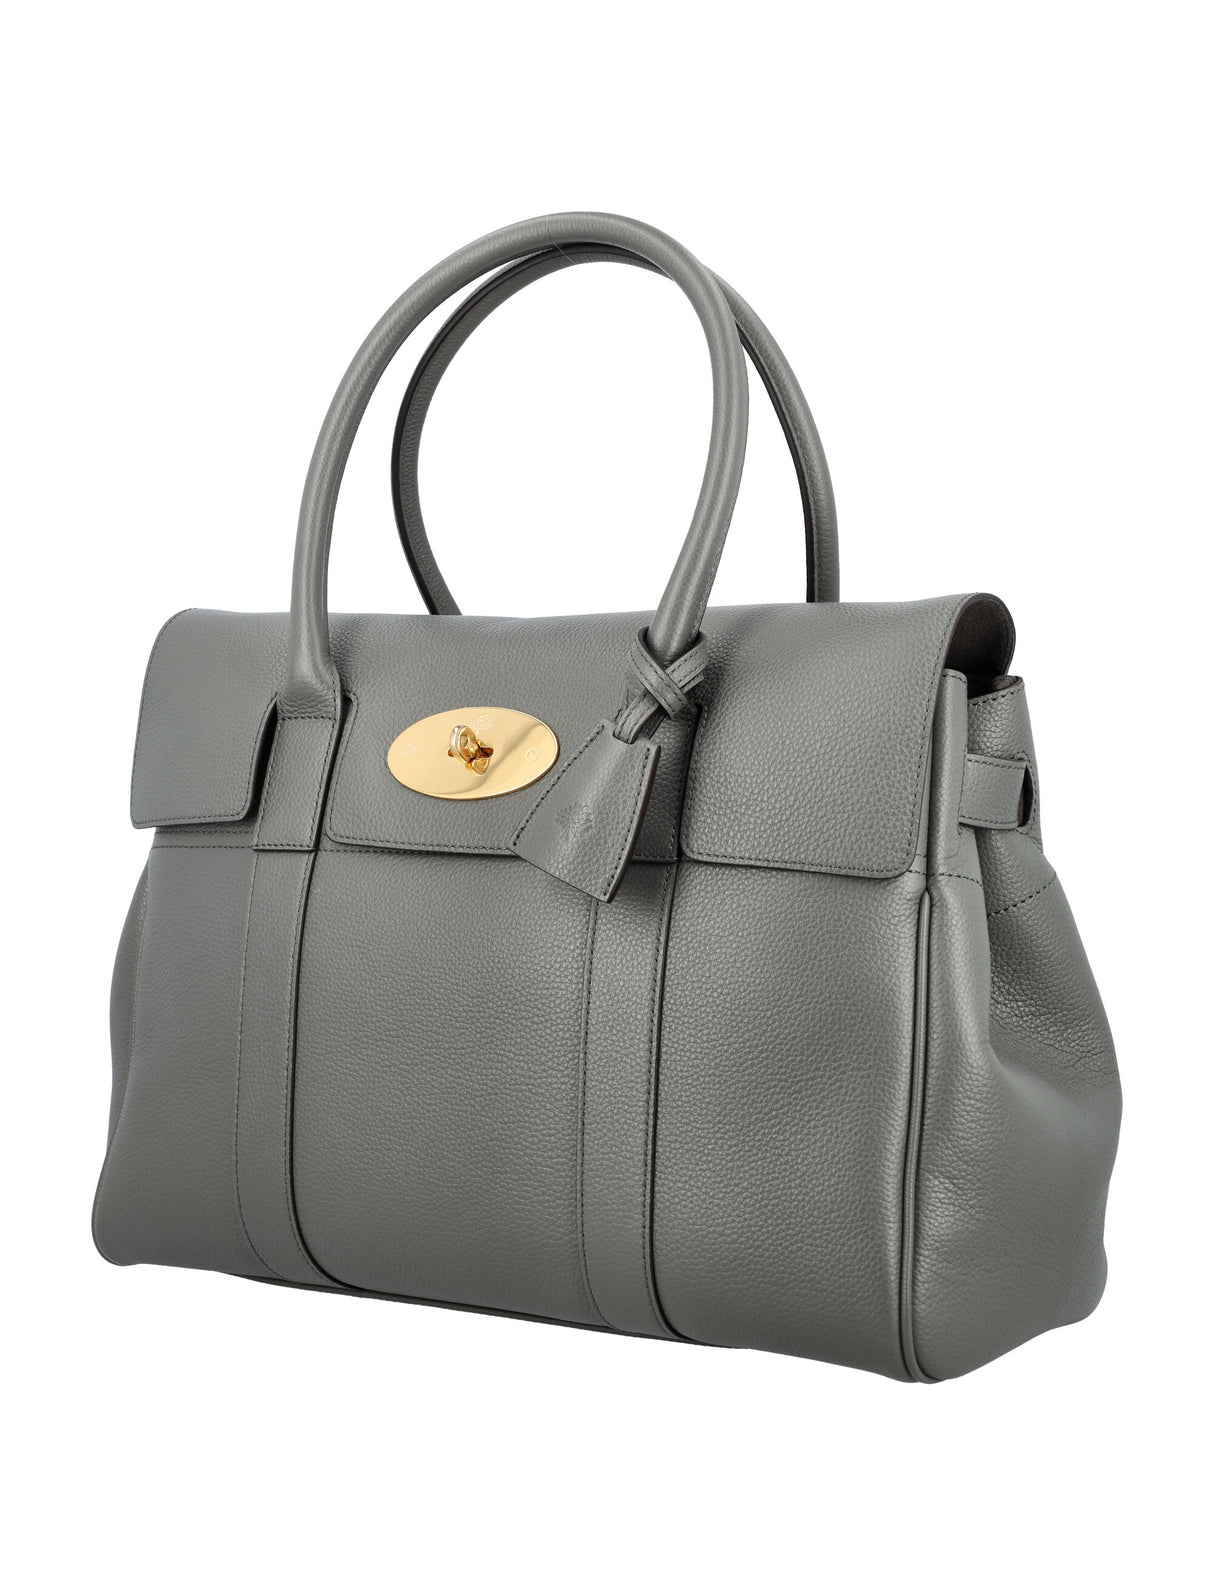 MULBERRY Elegant and Chic: The Classic Grain Leather Top-Handle Handbag for Women